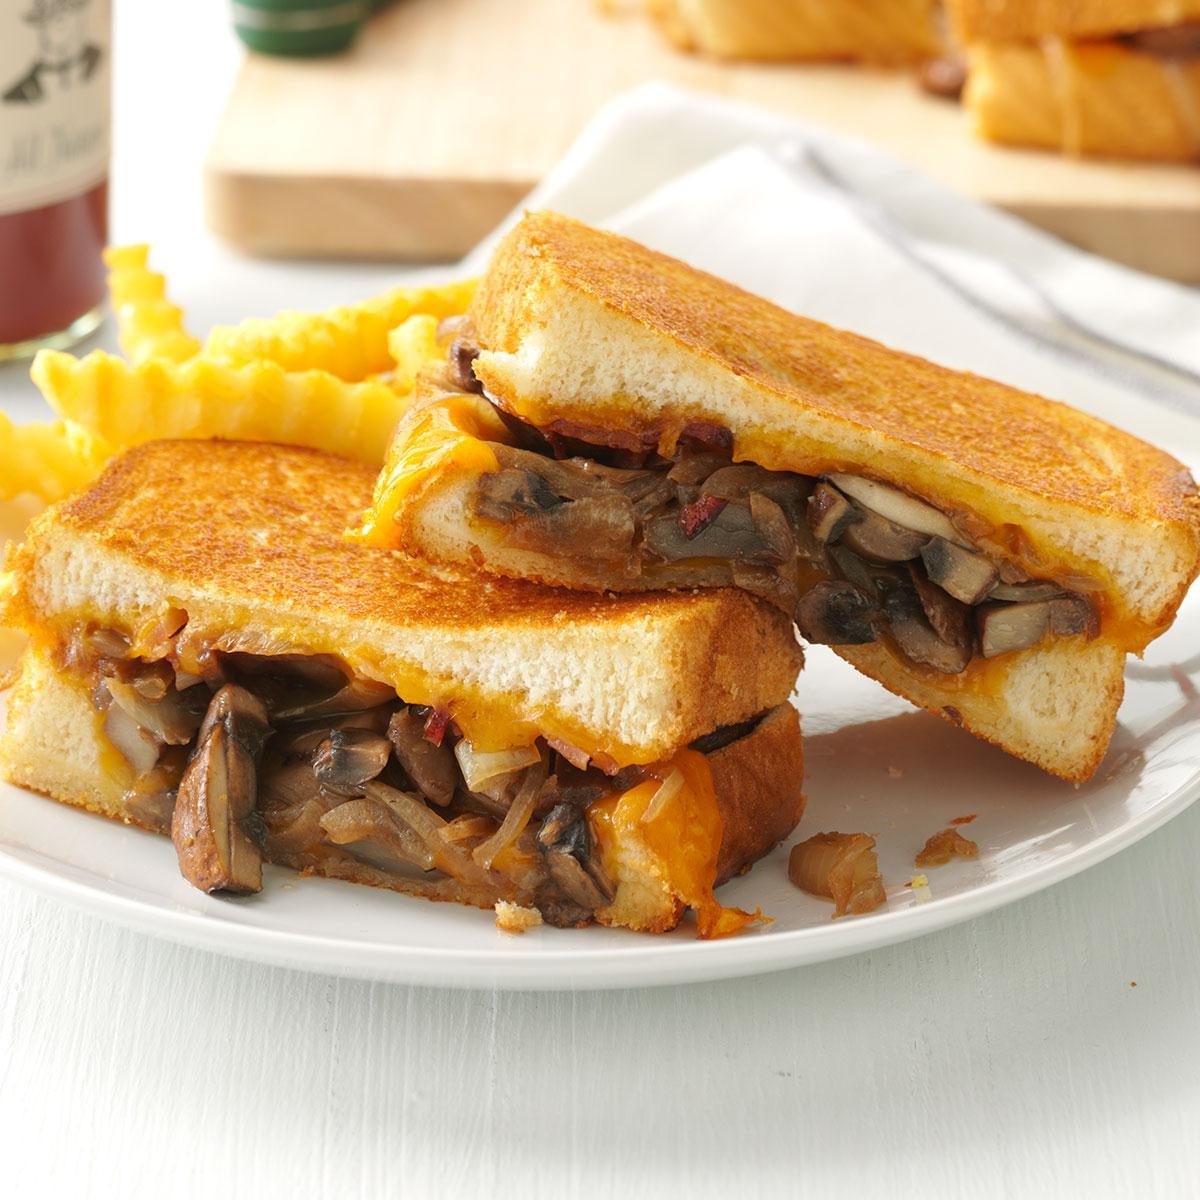 <p>We took grilled cheese up a notch with baby portobello mushrooms, bacon and cheddar. For weeknight comfort food, it’s good to the last crumb. Readers of my blog, theseasonedmom.com, love these! —Blair Lonergan, Rochelle, Virginia </p> <div class="listicle-page__buttons"> <div class="listicle-page__cta-button"><a href='https://www.tasteofhome.com/recipes/mushroom-onion-grilled-cheese-sandwiches/'>Go to Recipe</a></div> </div>